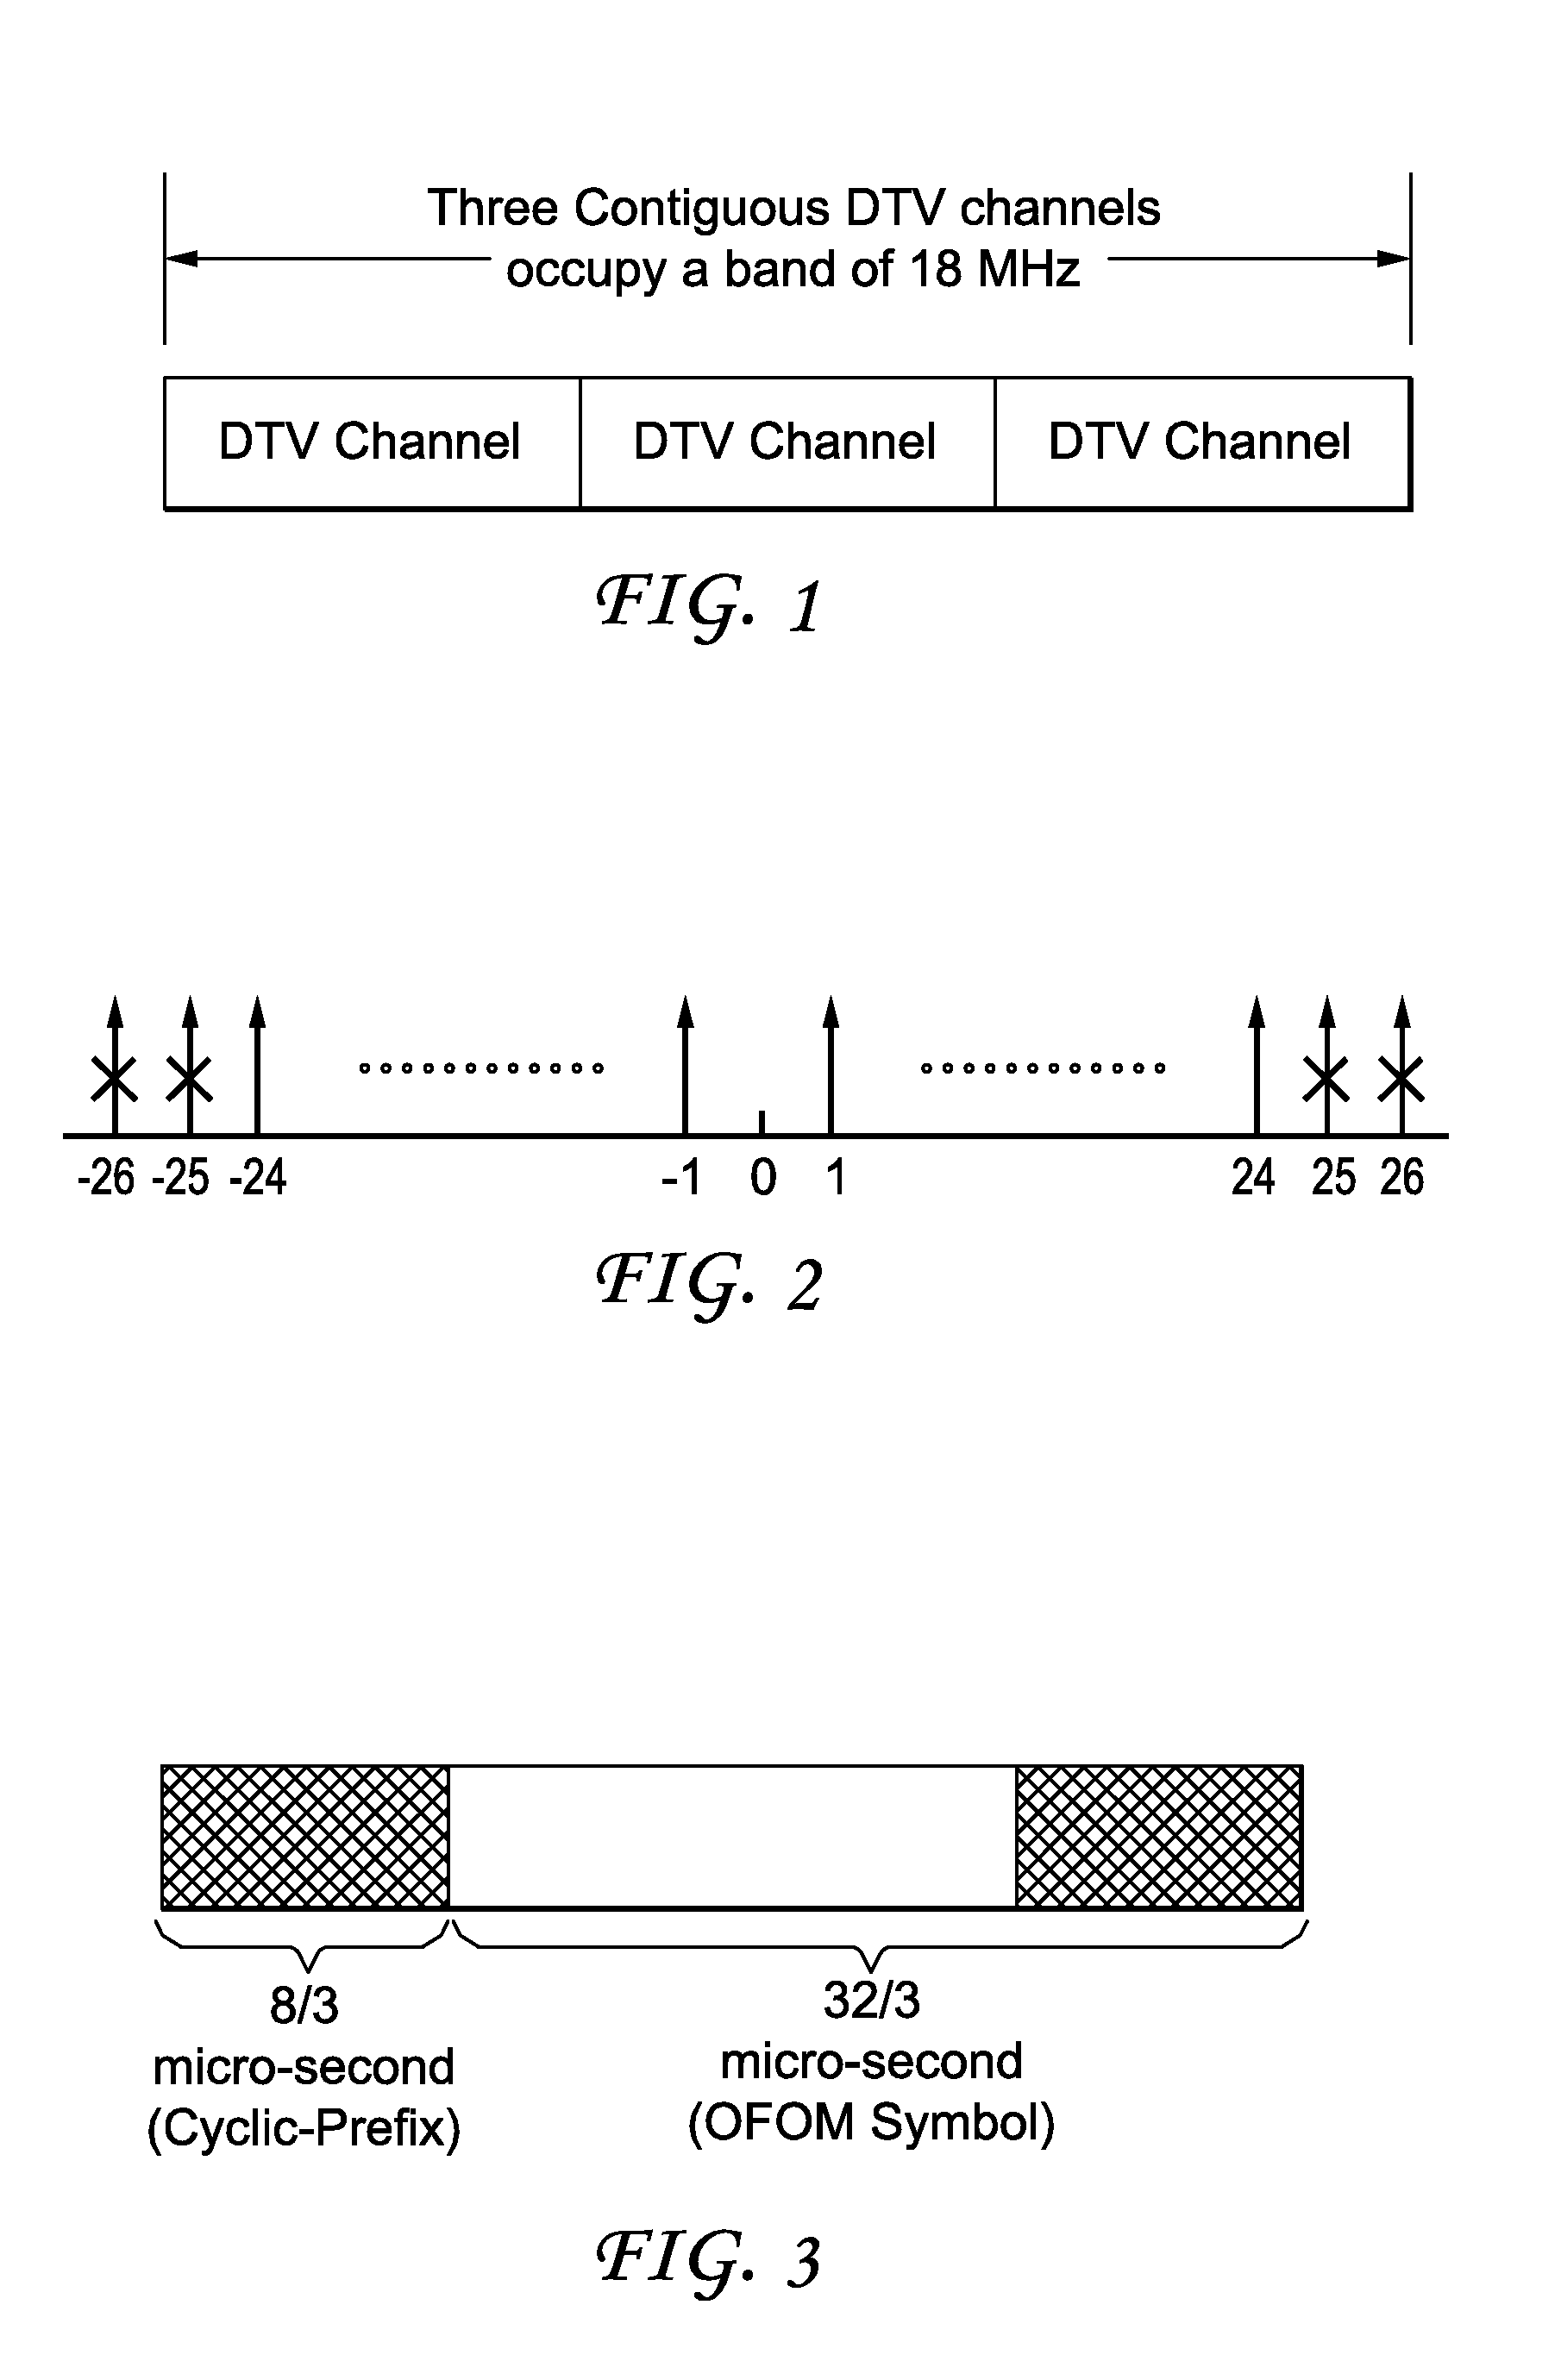 White space usage for wireleess local area network devices